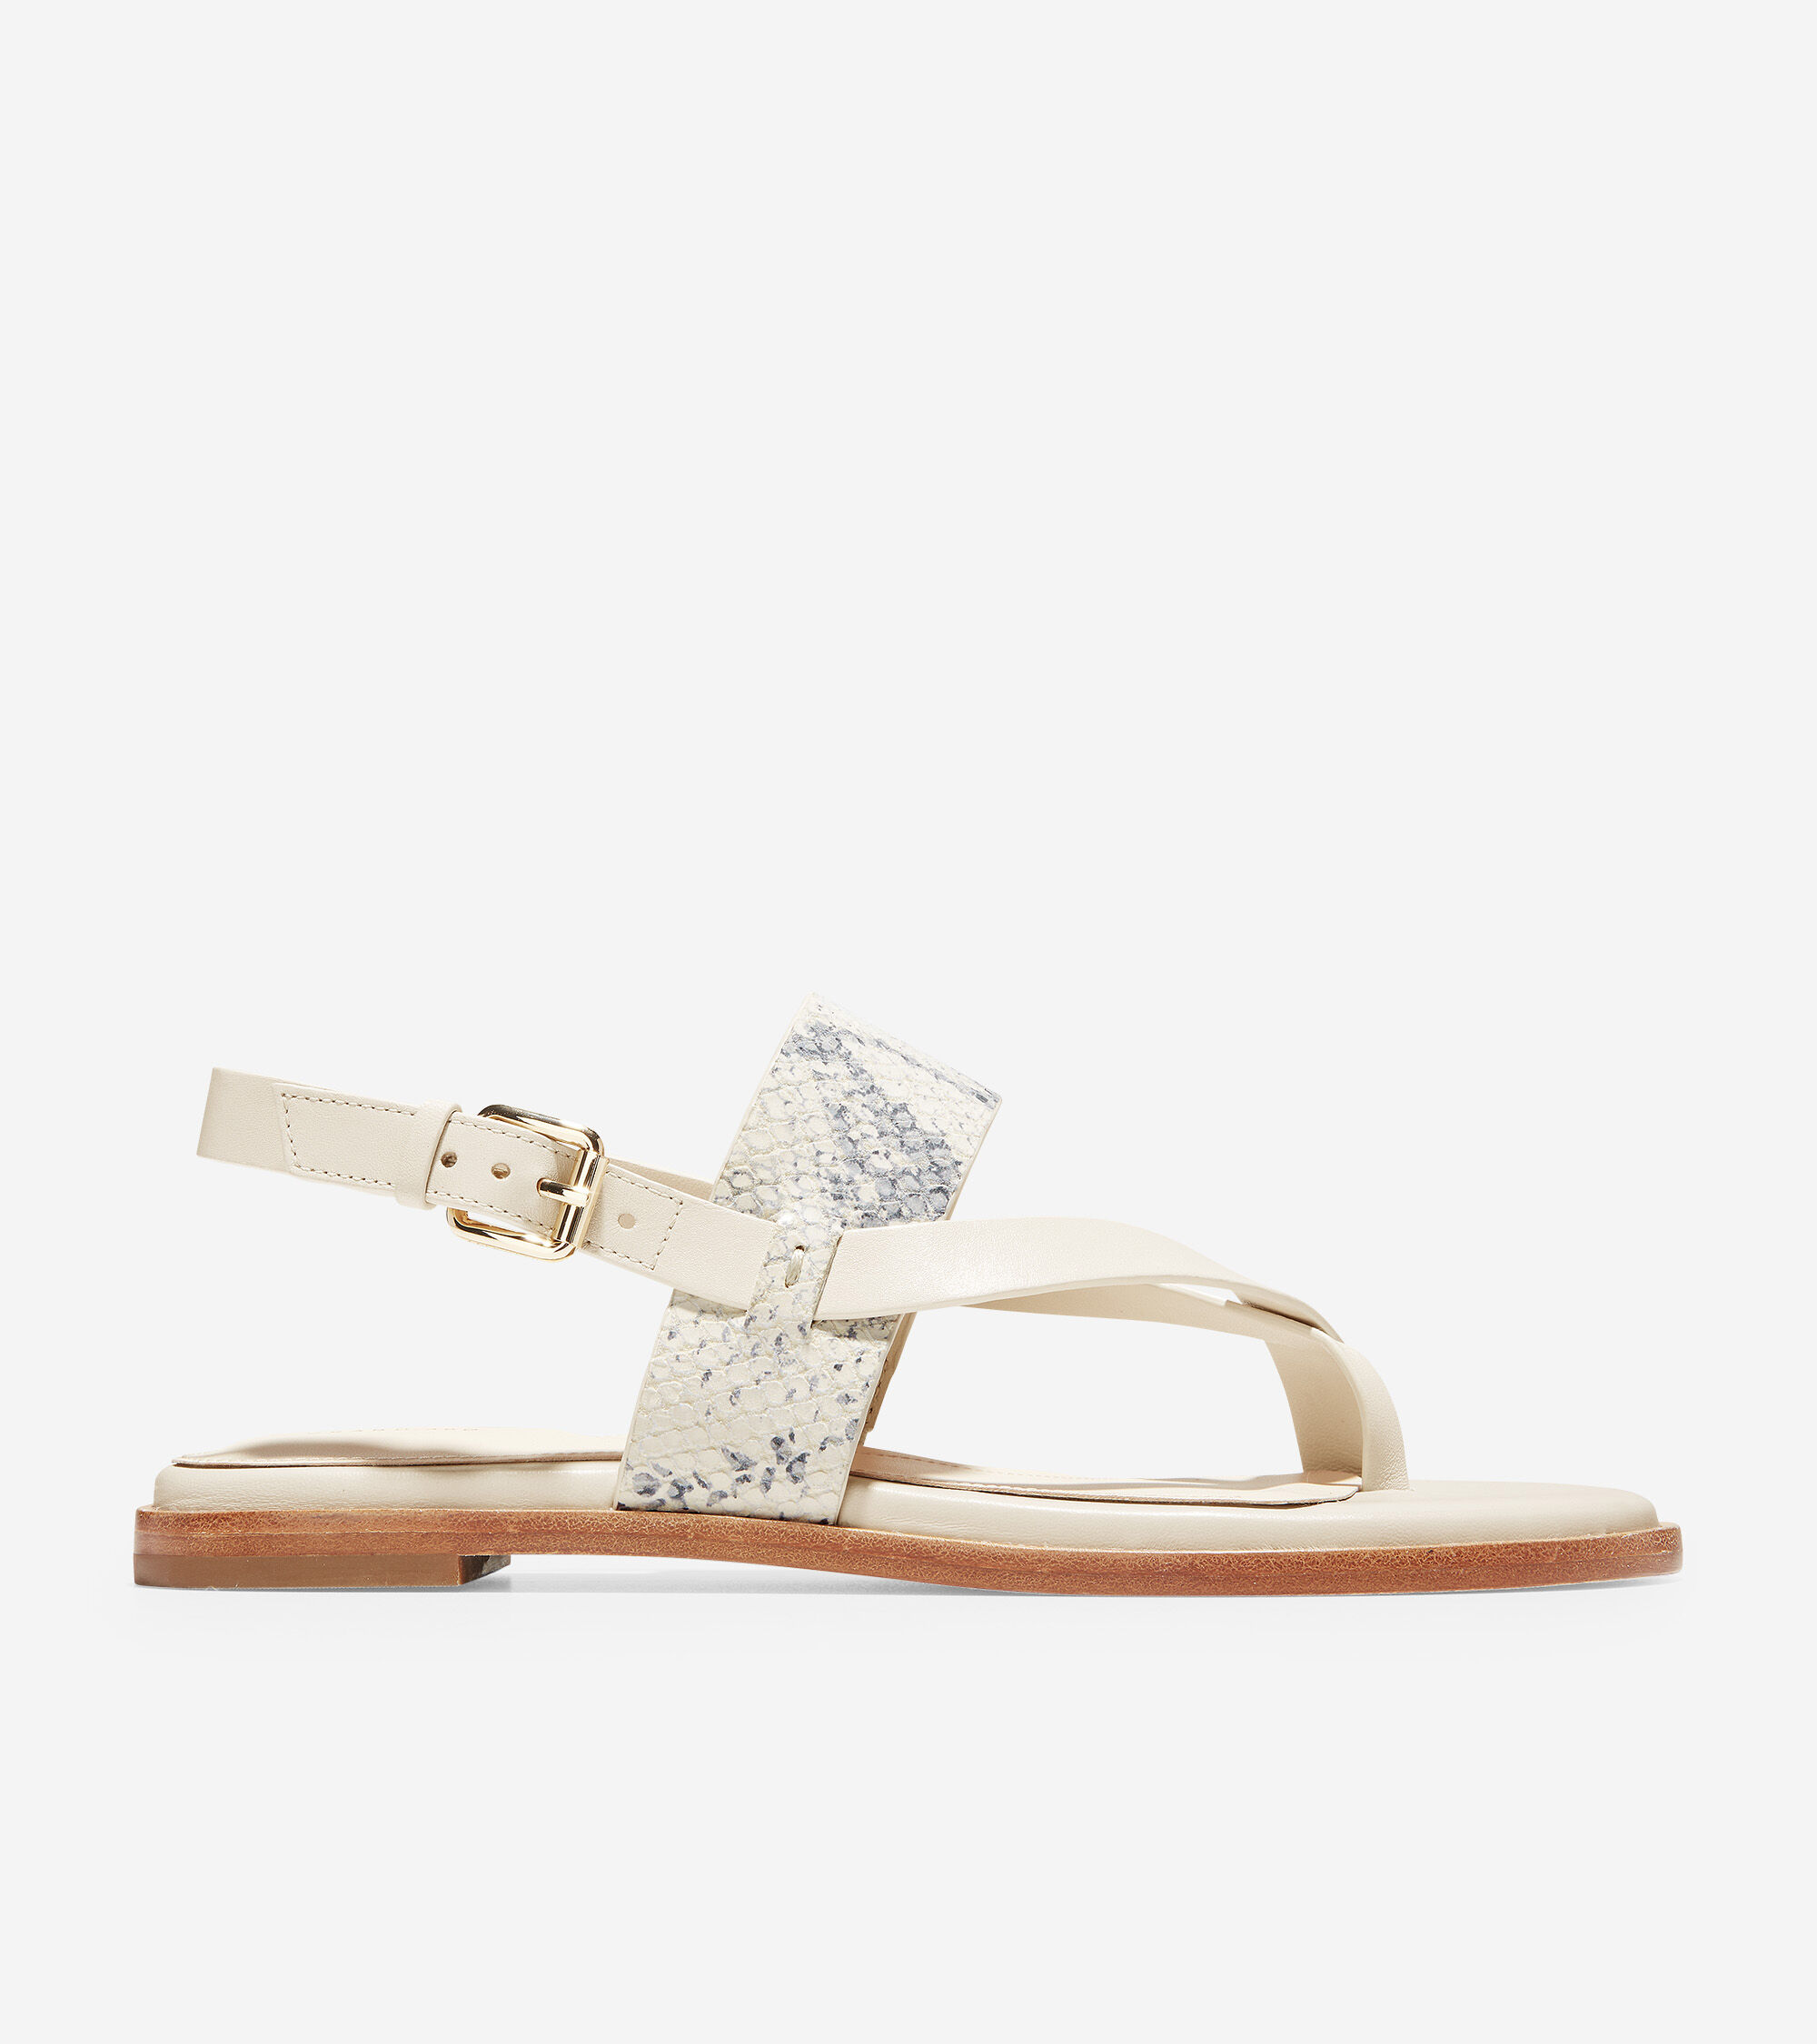 cole haan sandals anica